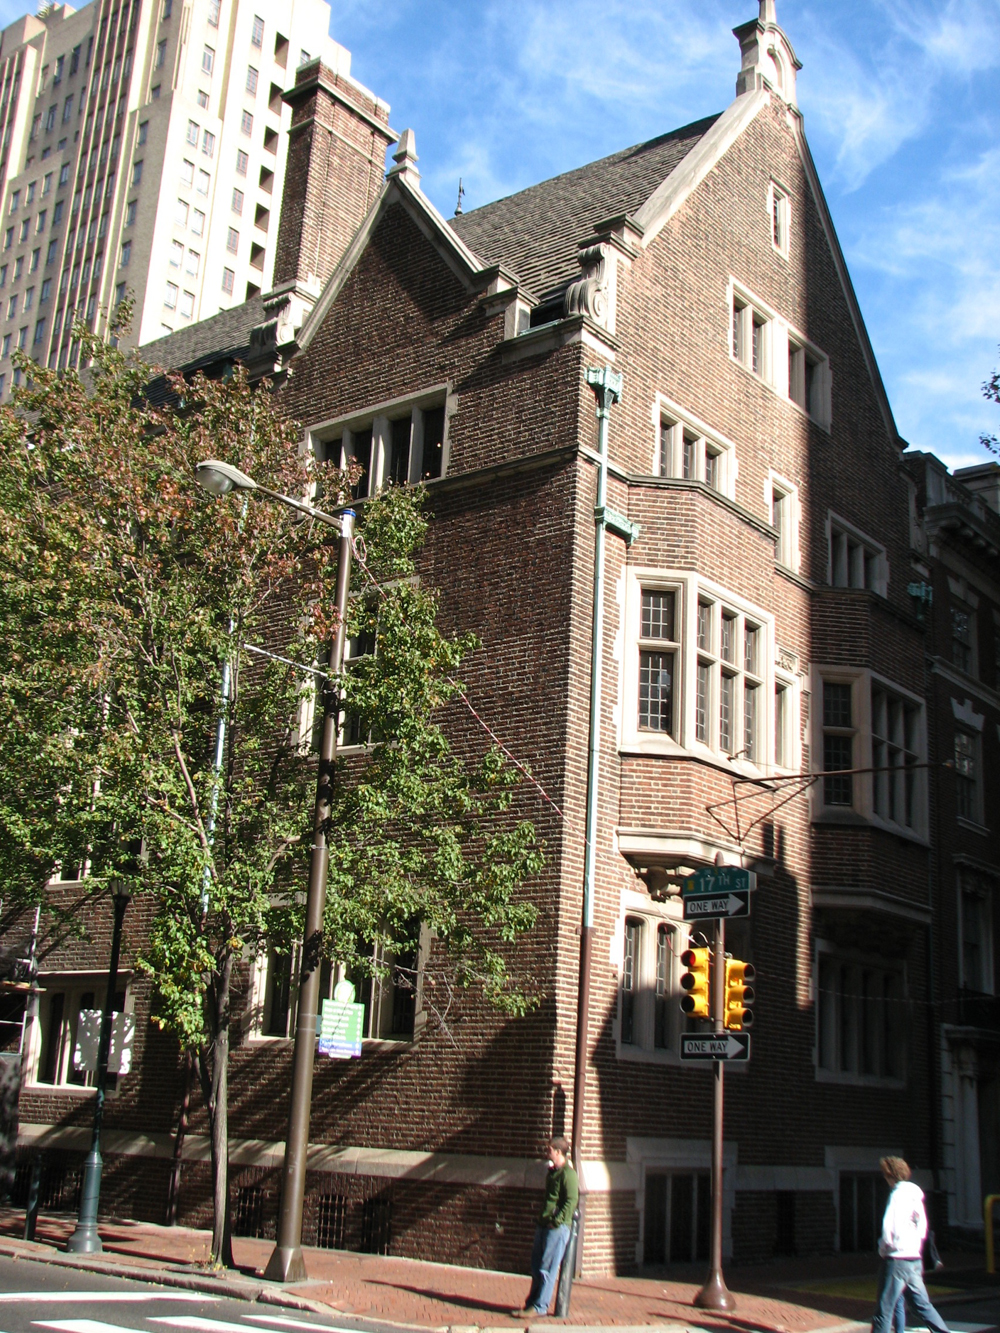 The medieval style mansion at 17th and Locust was designed by Frank Miles Day.